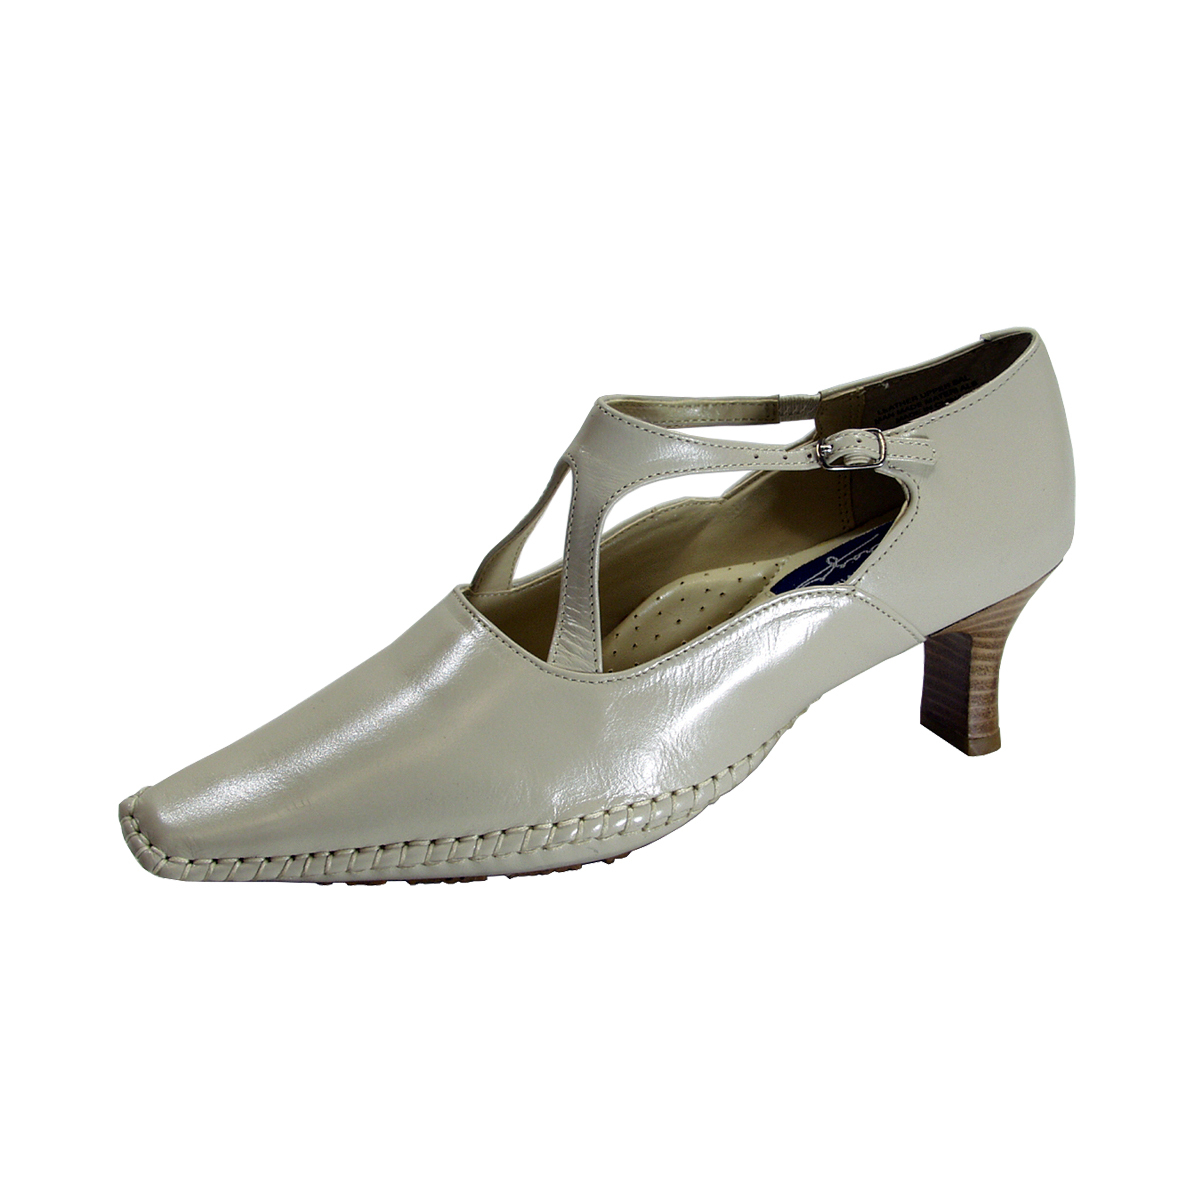 Primary image for PEERAGE Roanne Women's Wide Width Stitched Leather Pump